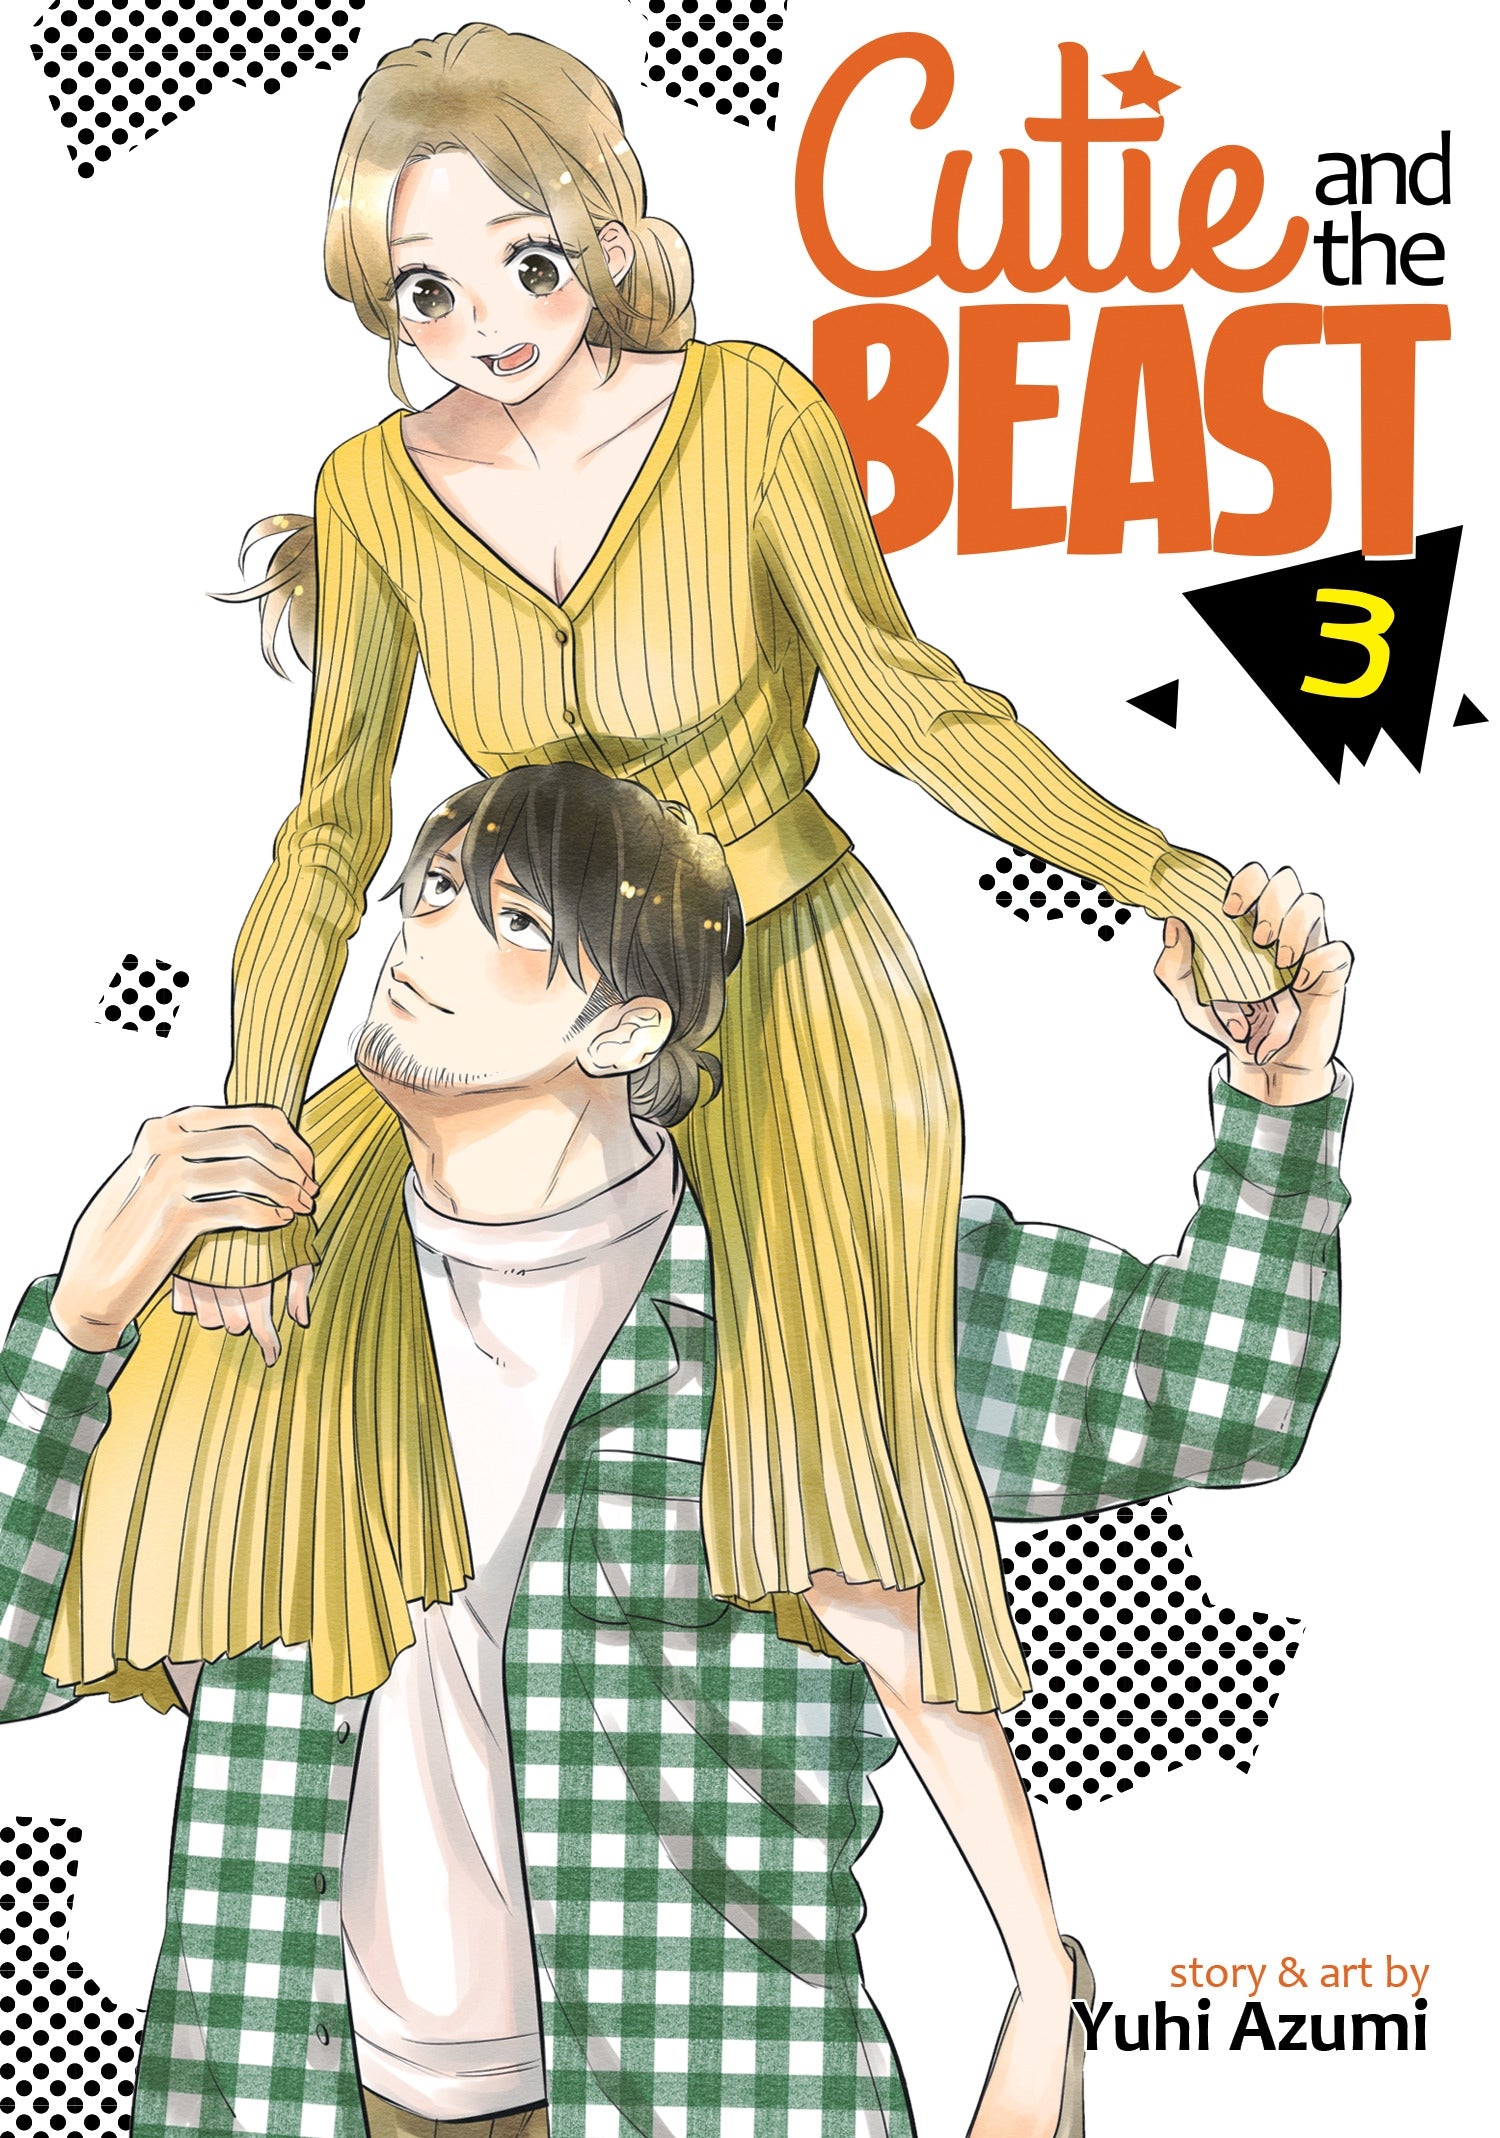 Cutie and the Beast, Vol. 3